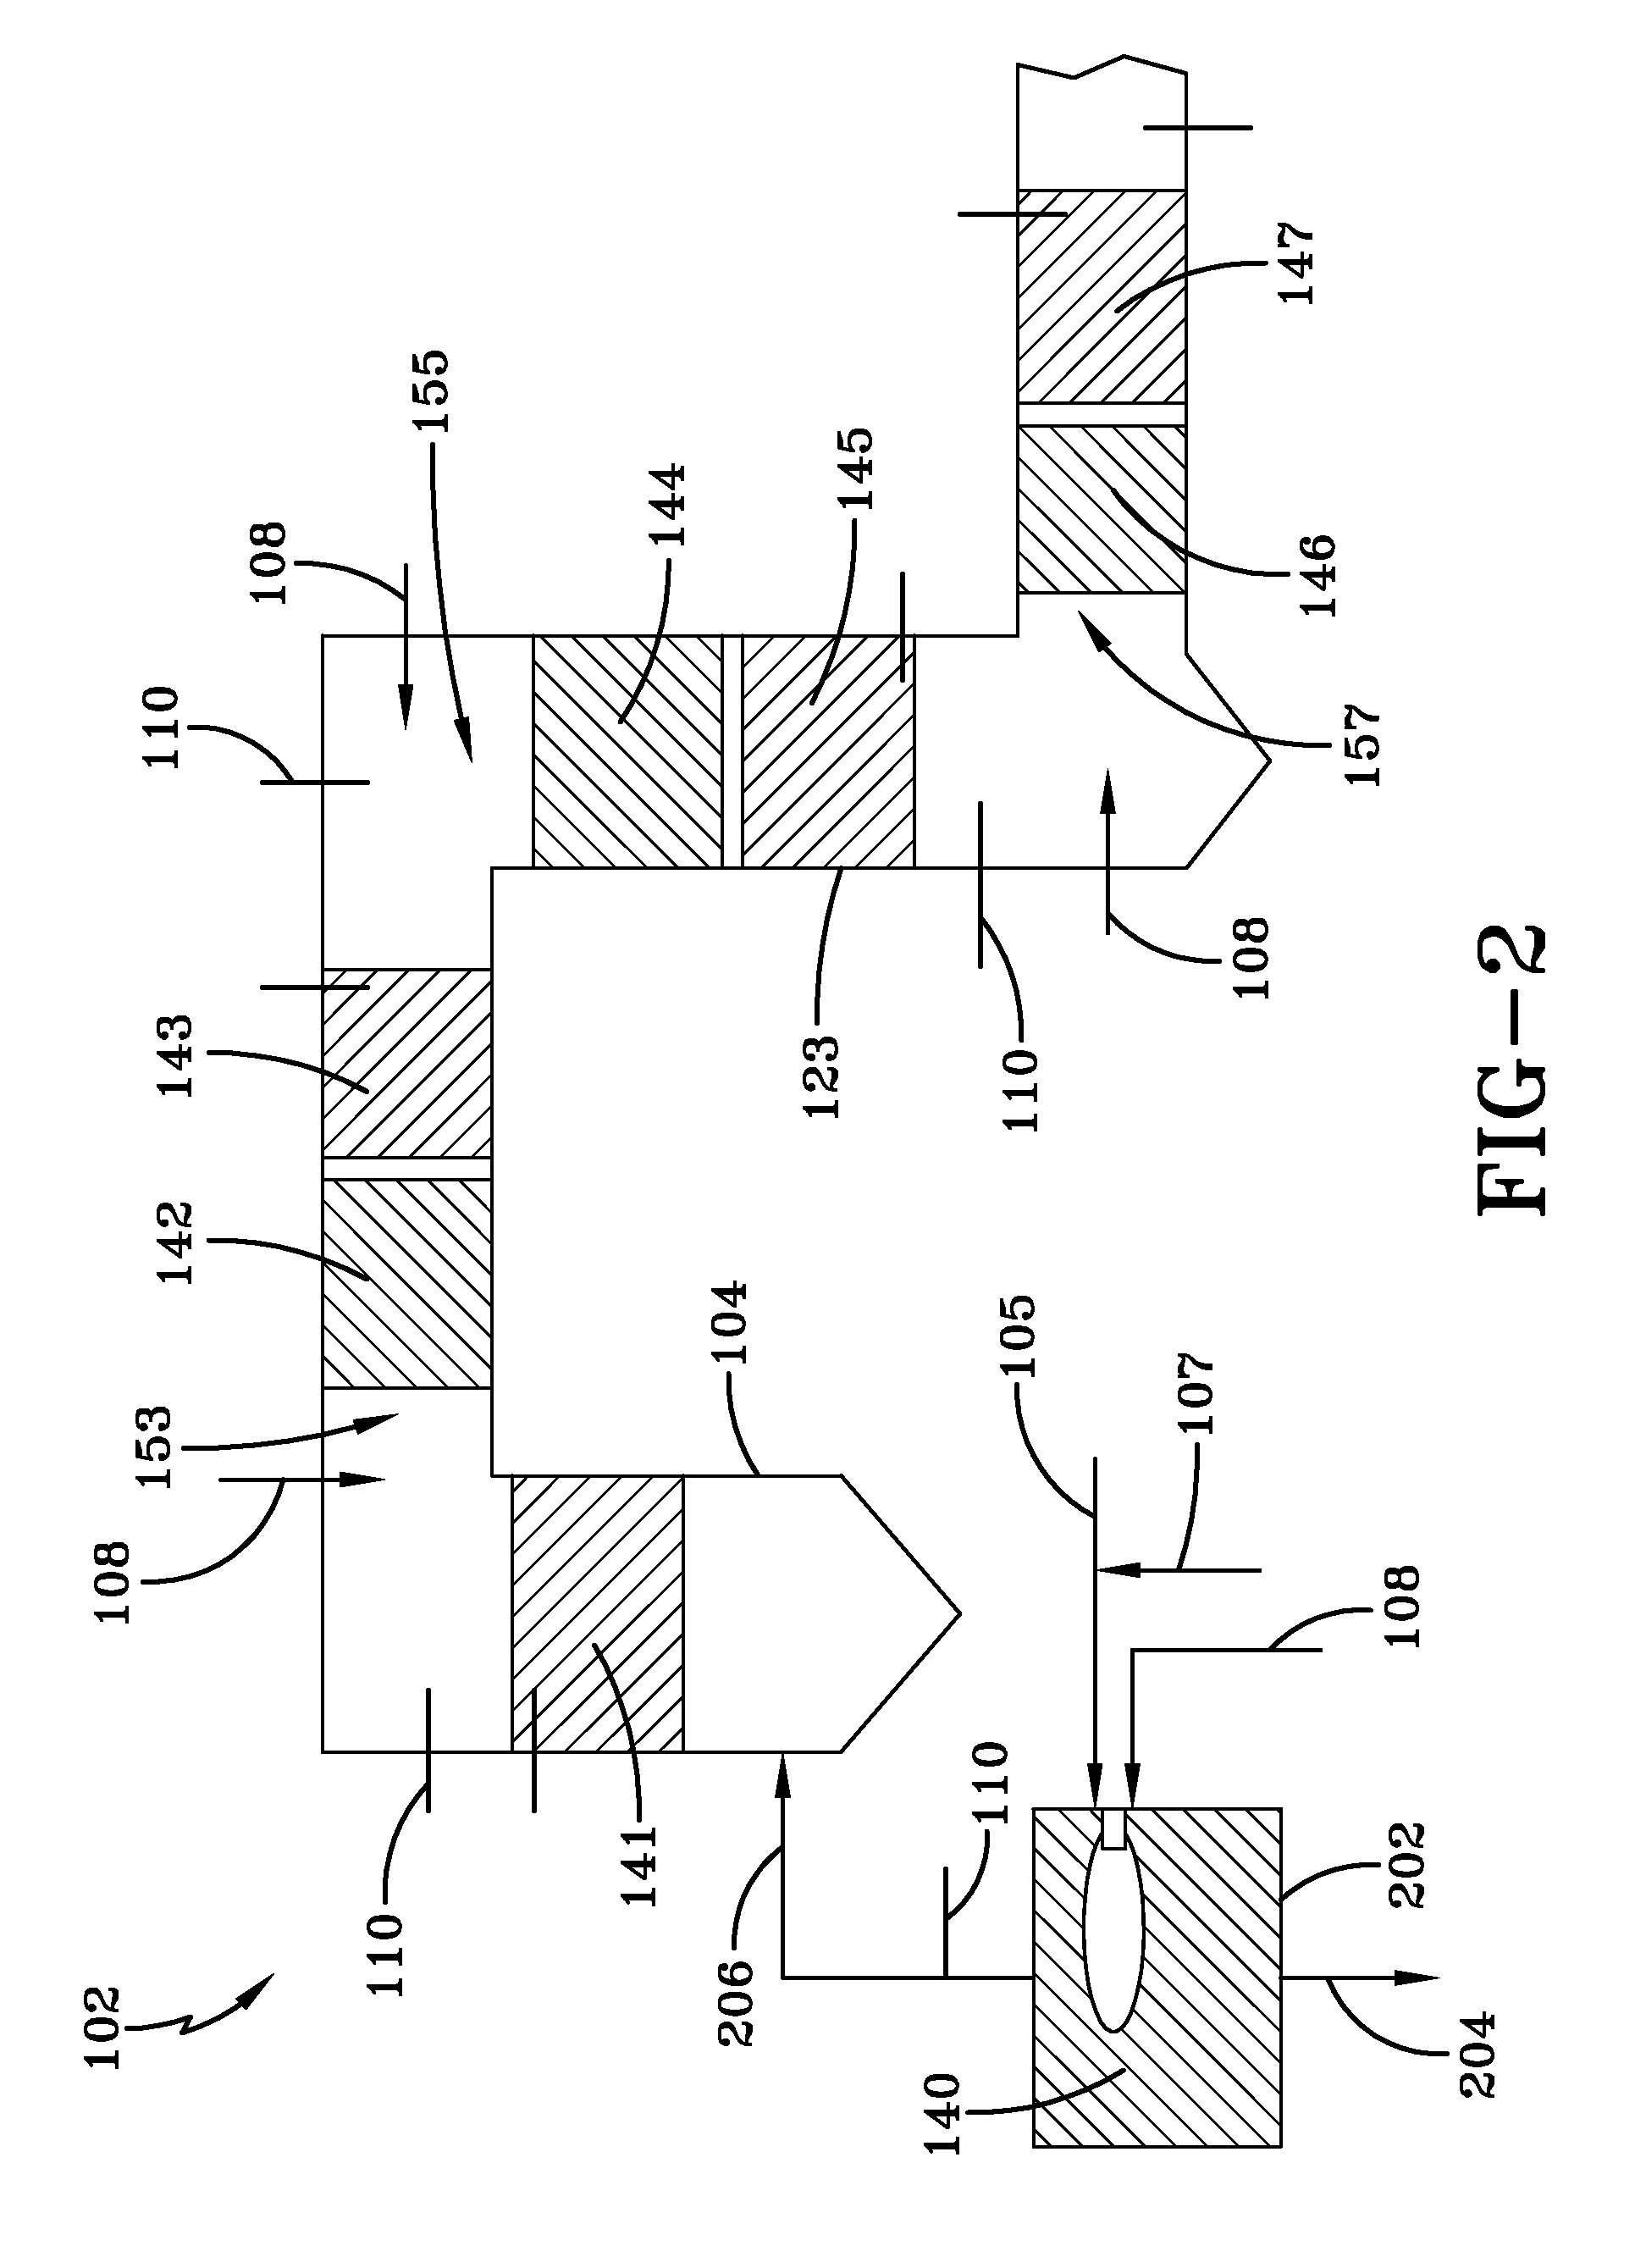 Oxy/fuel combustion system with minimized flue gas recirculation